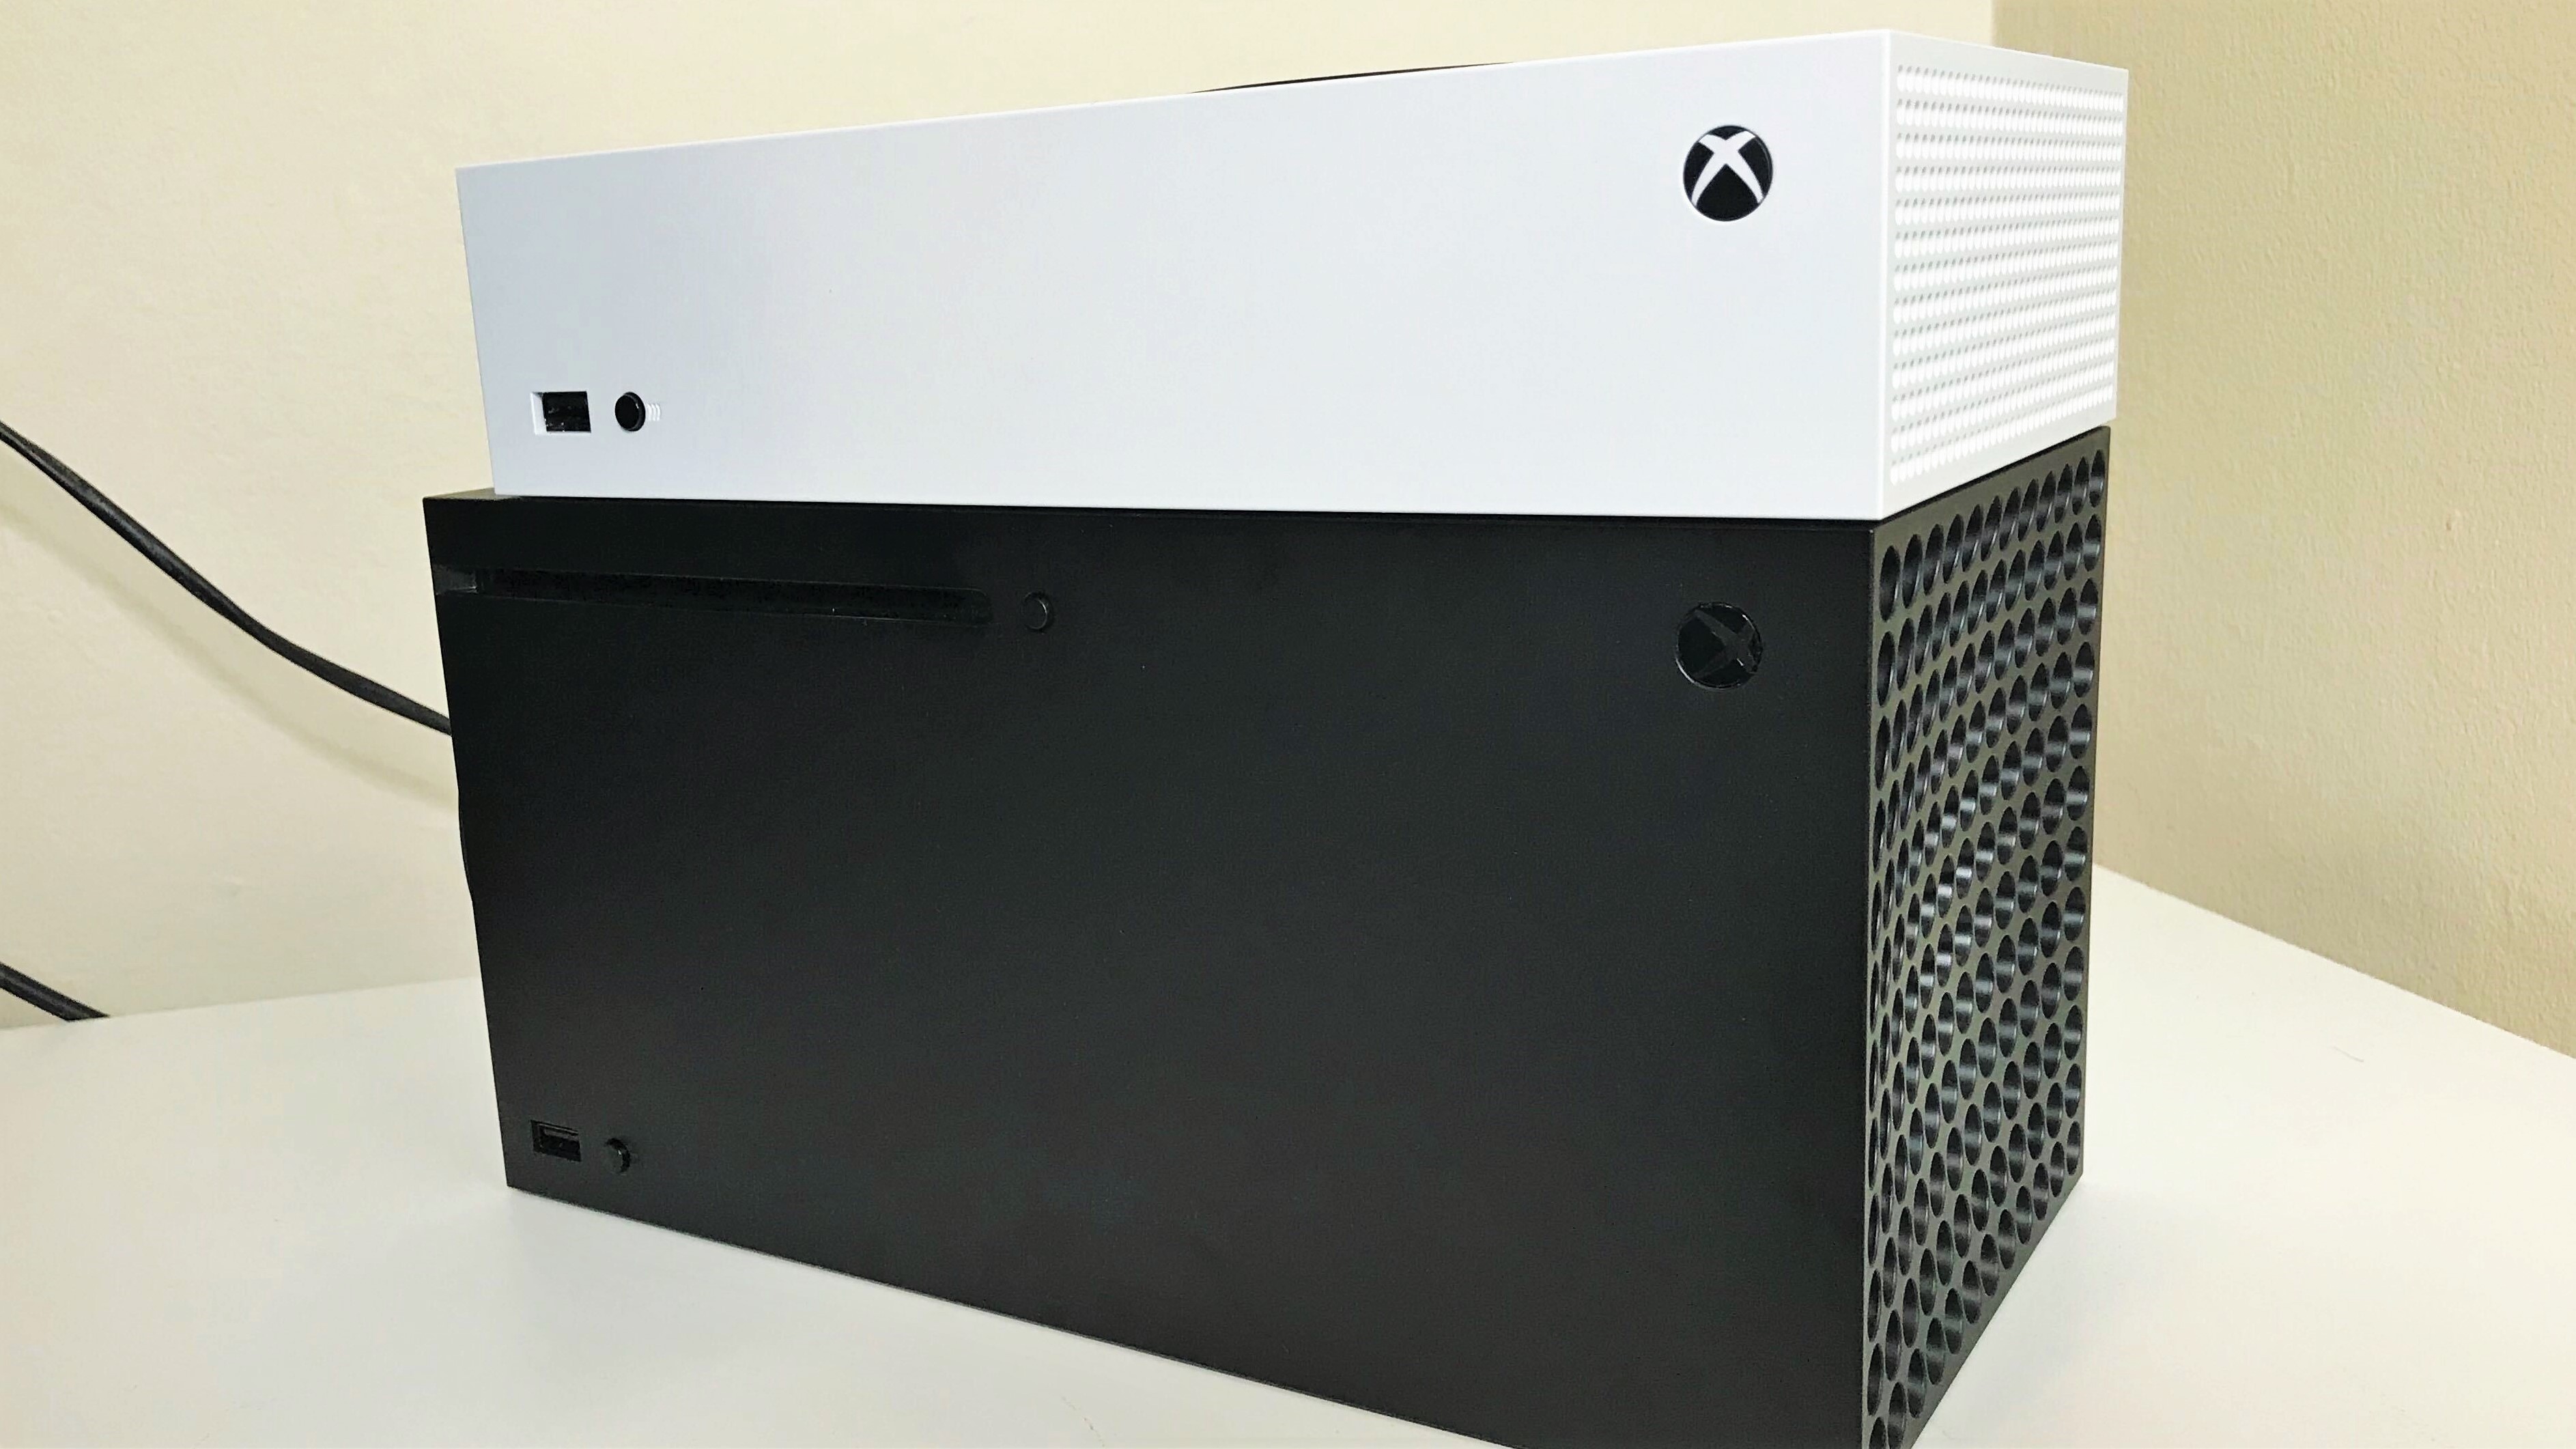 fence Psychological Umeki We Have The Xbox Series X And Series S Mockup Consoles: A Closer Look And  Size Comparisons - GameSpot